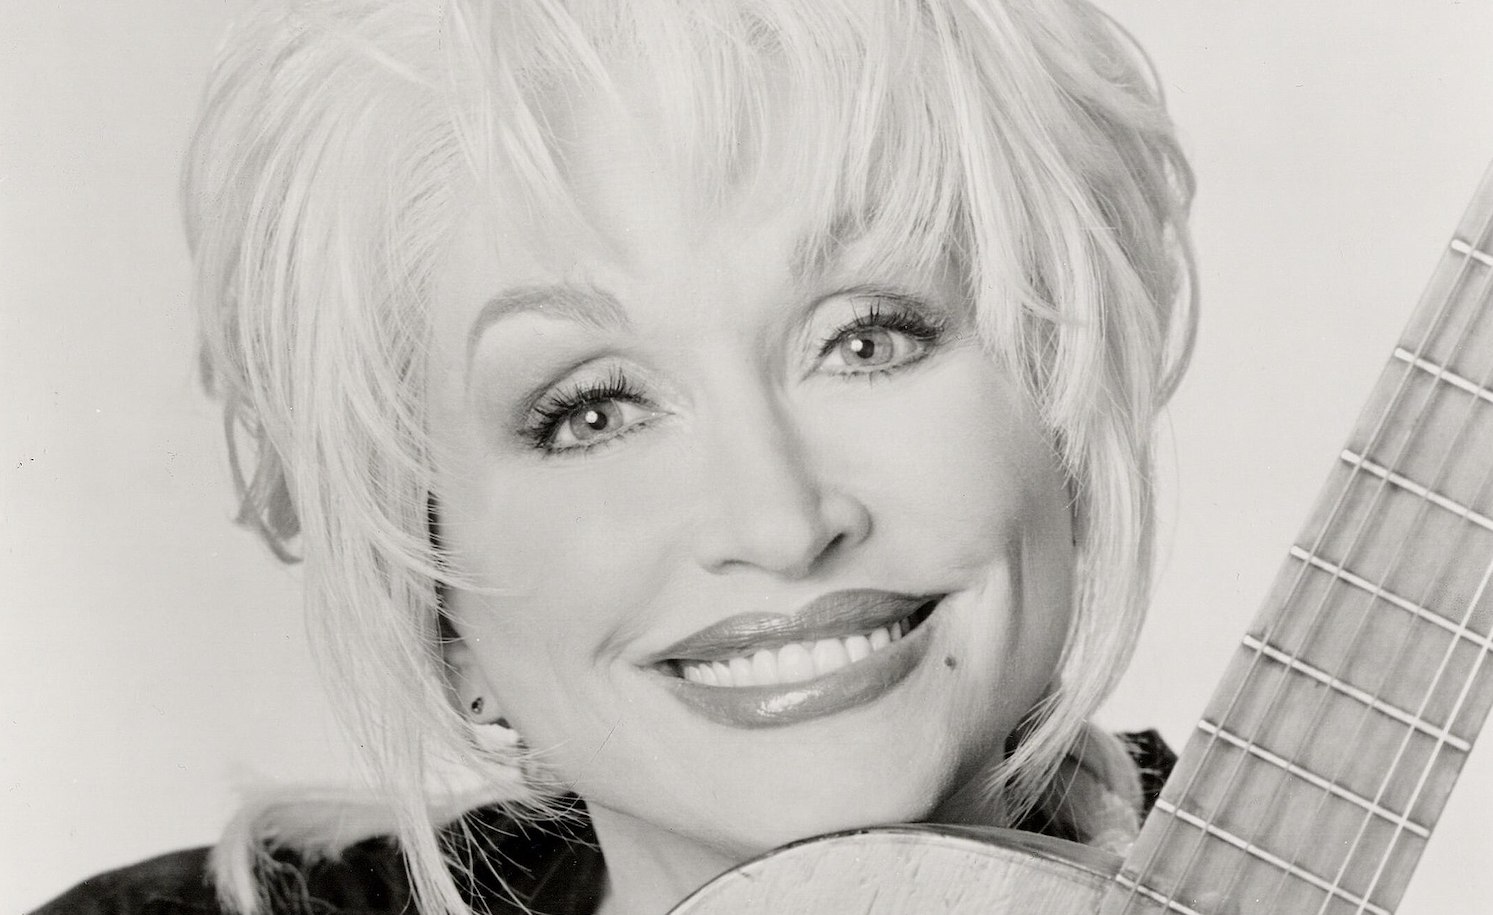 Based on recent comments, Dolly Parton identifies as a “very sensitive person” and is likely an HSP.